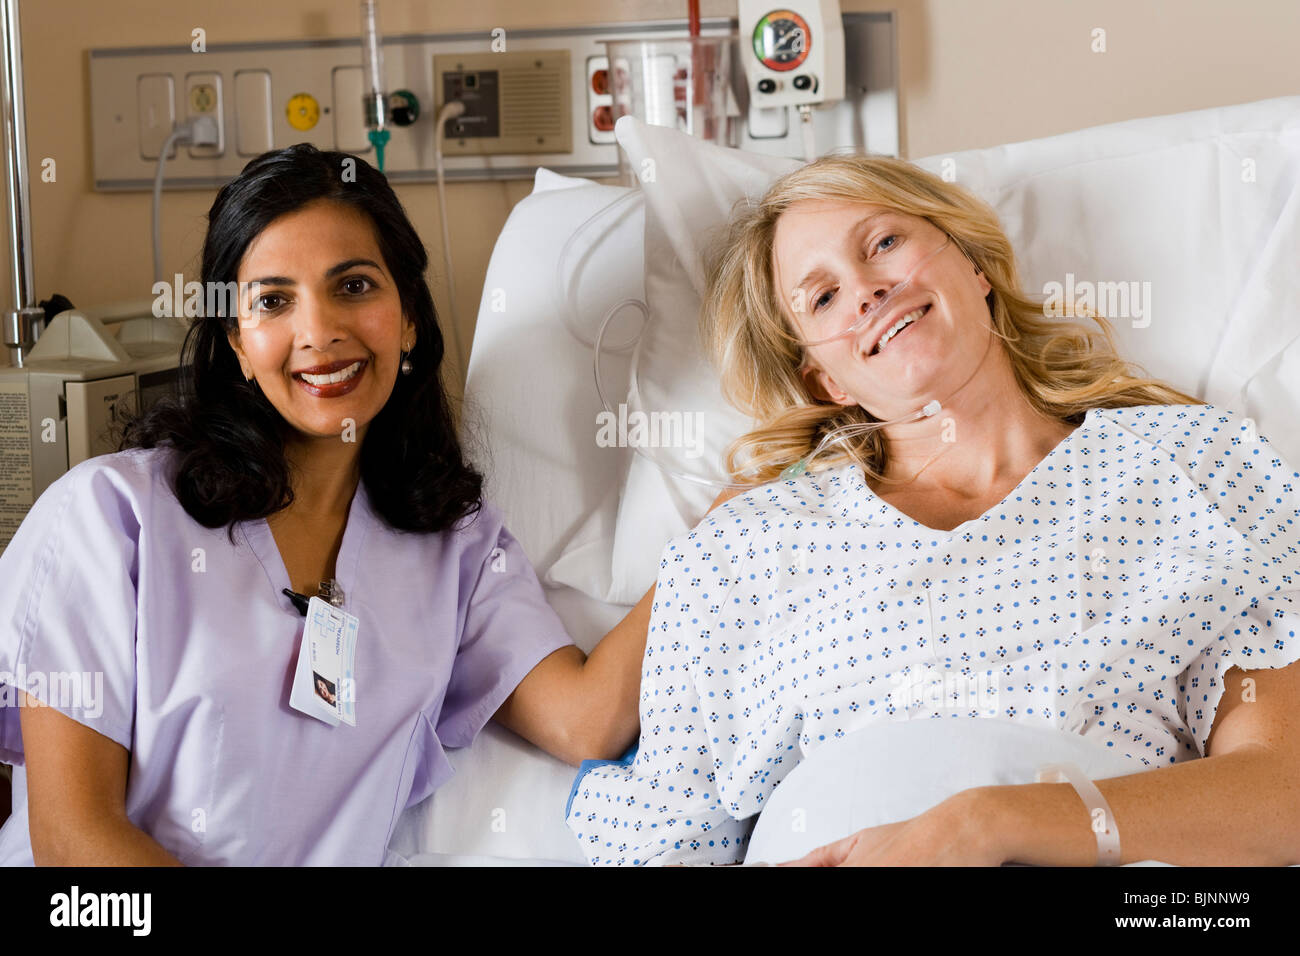 Woman in hospital bed smiling Stock Photo